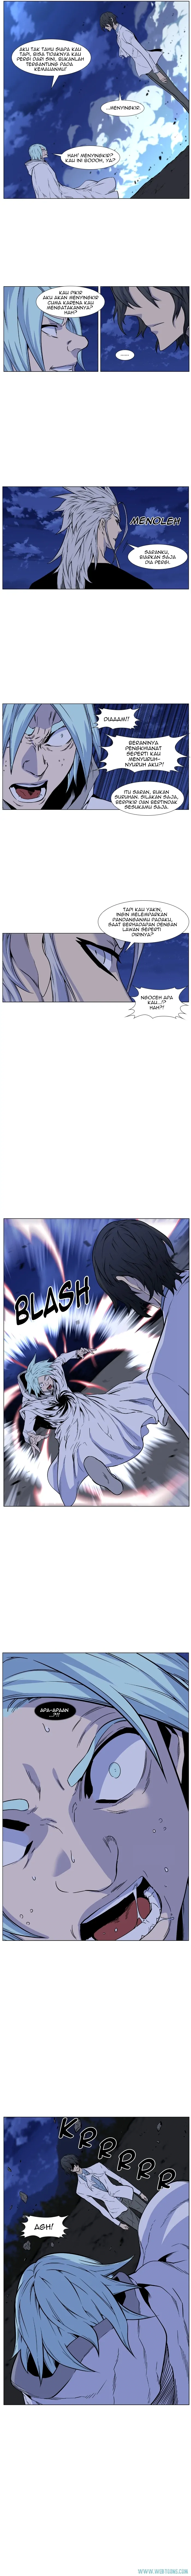 Noblesse Chapter 428 - 59